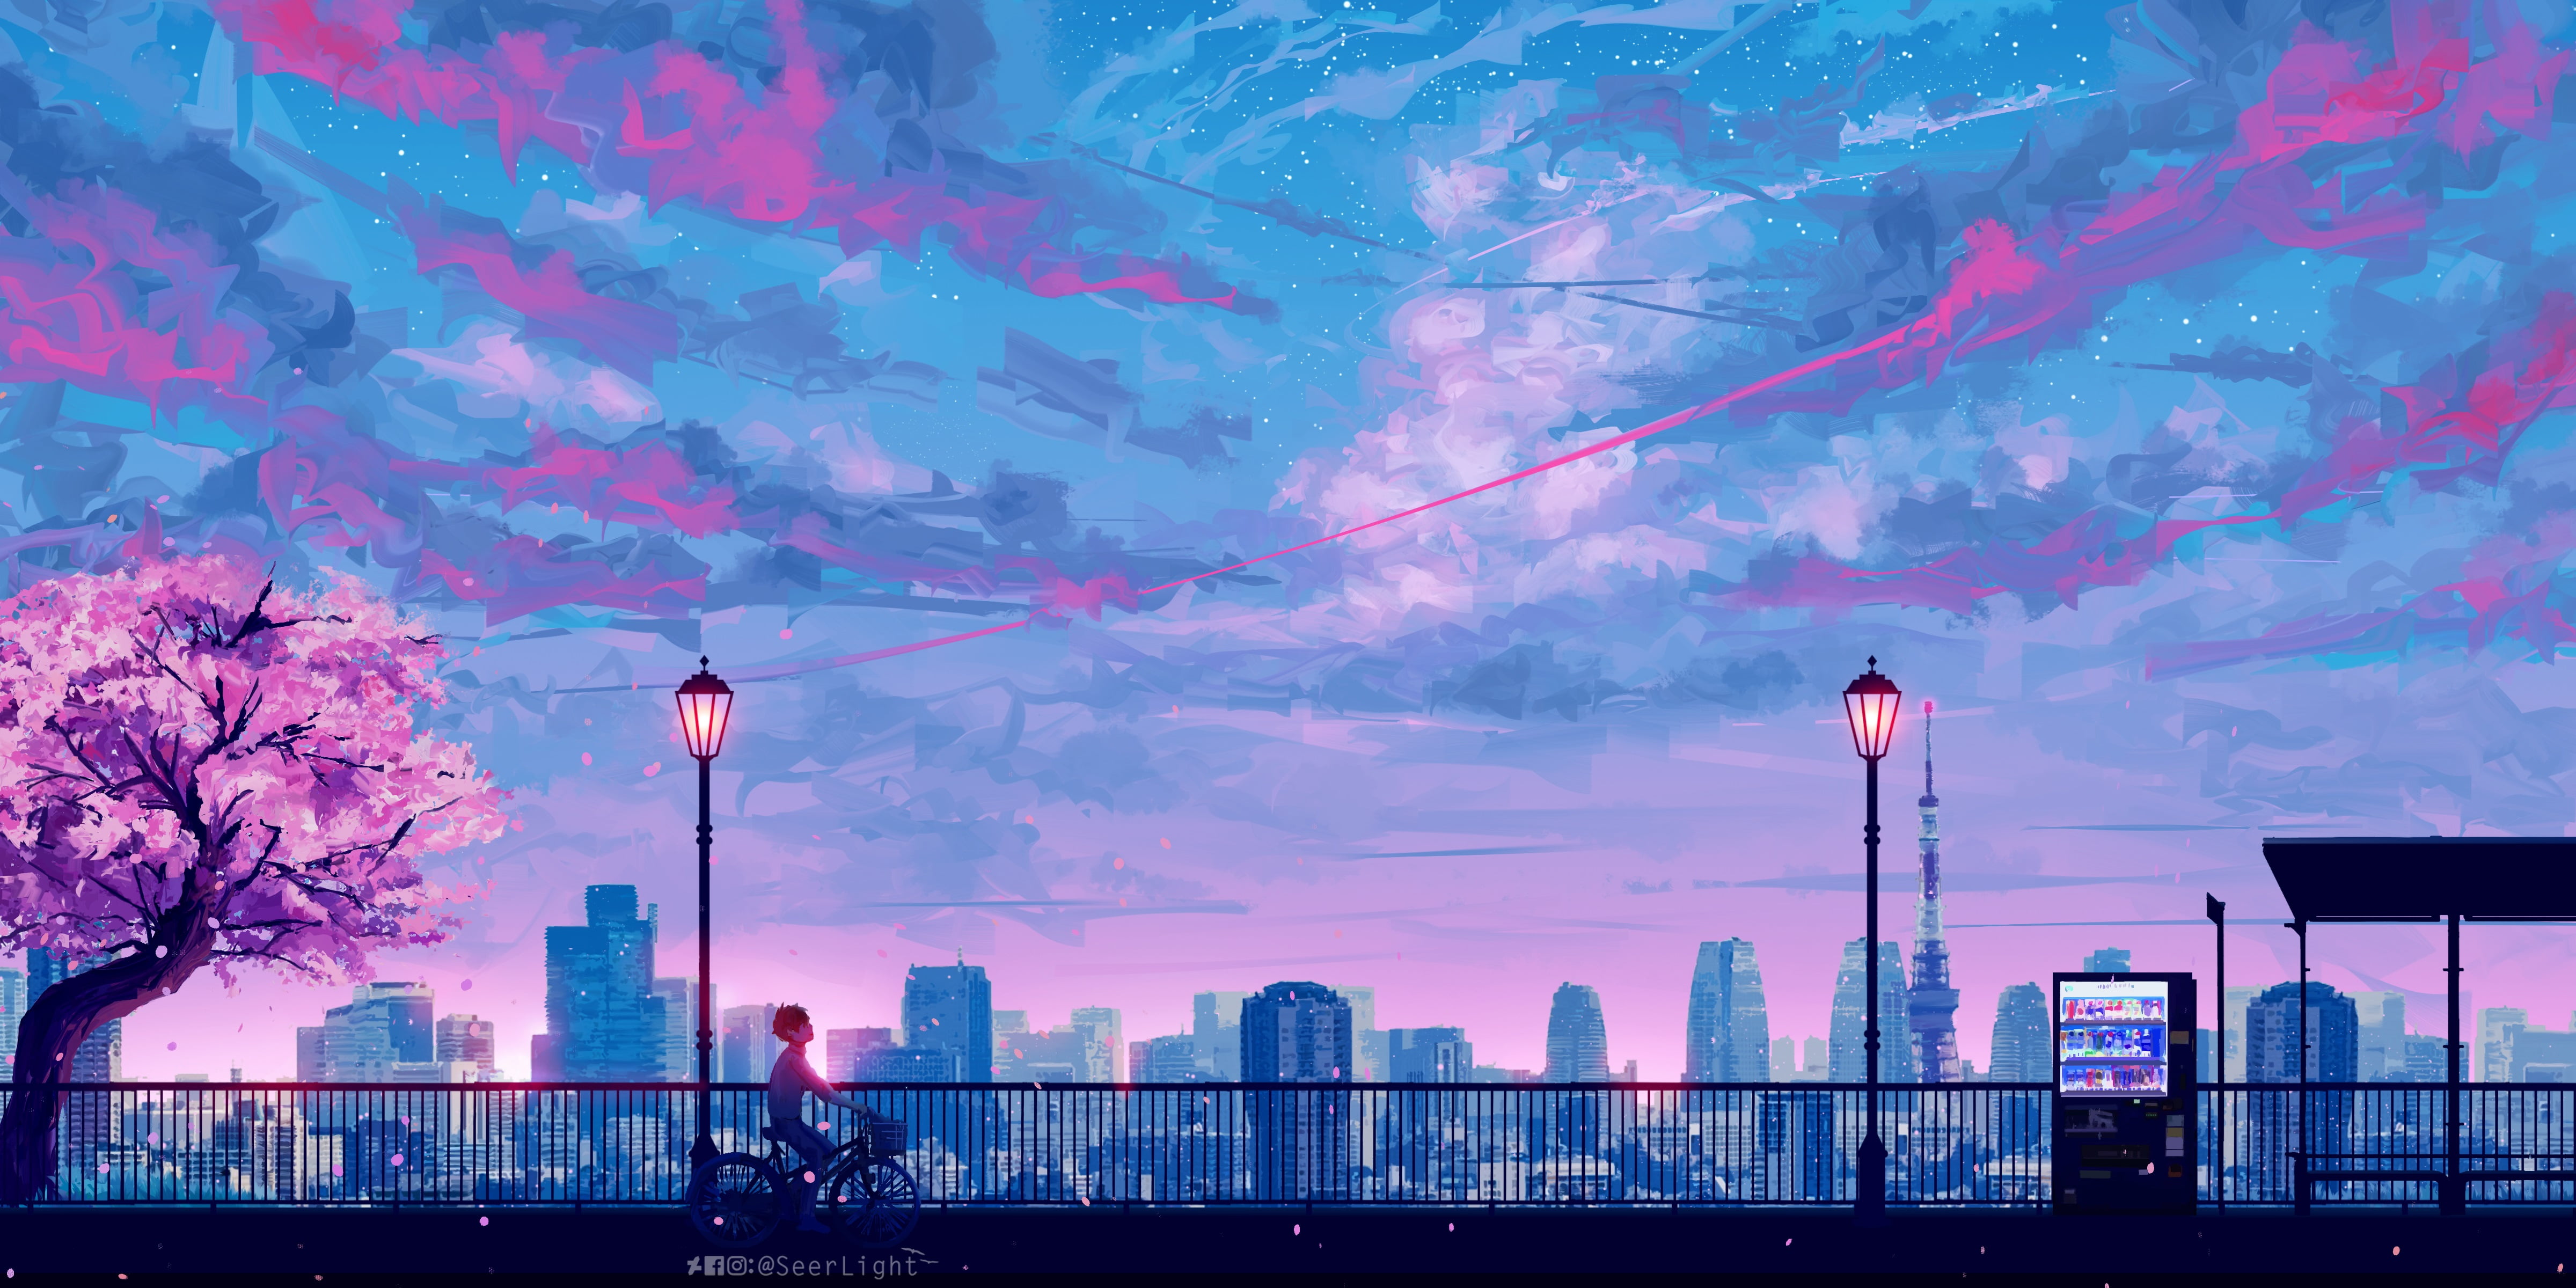 Blue and pink sky painting, illustration, city, anime